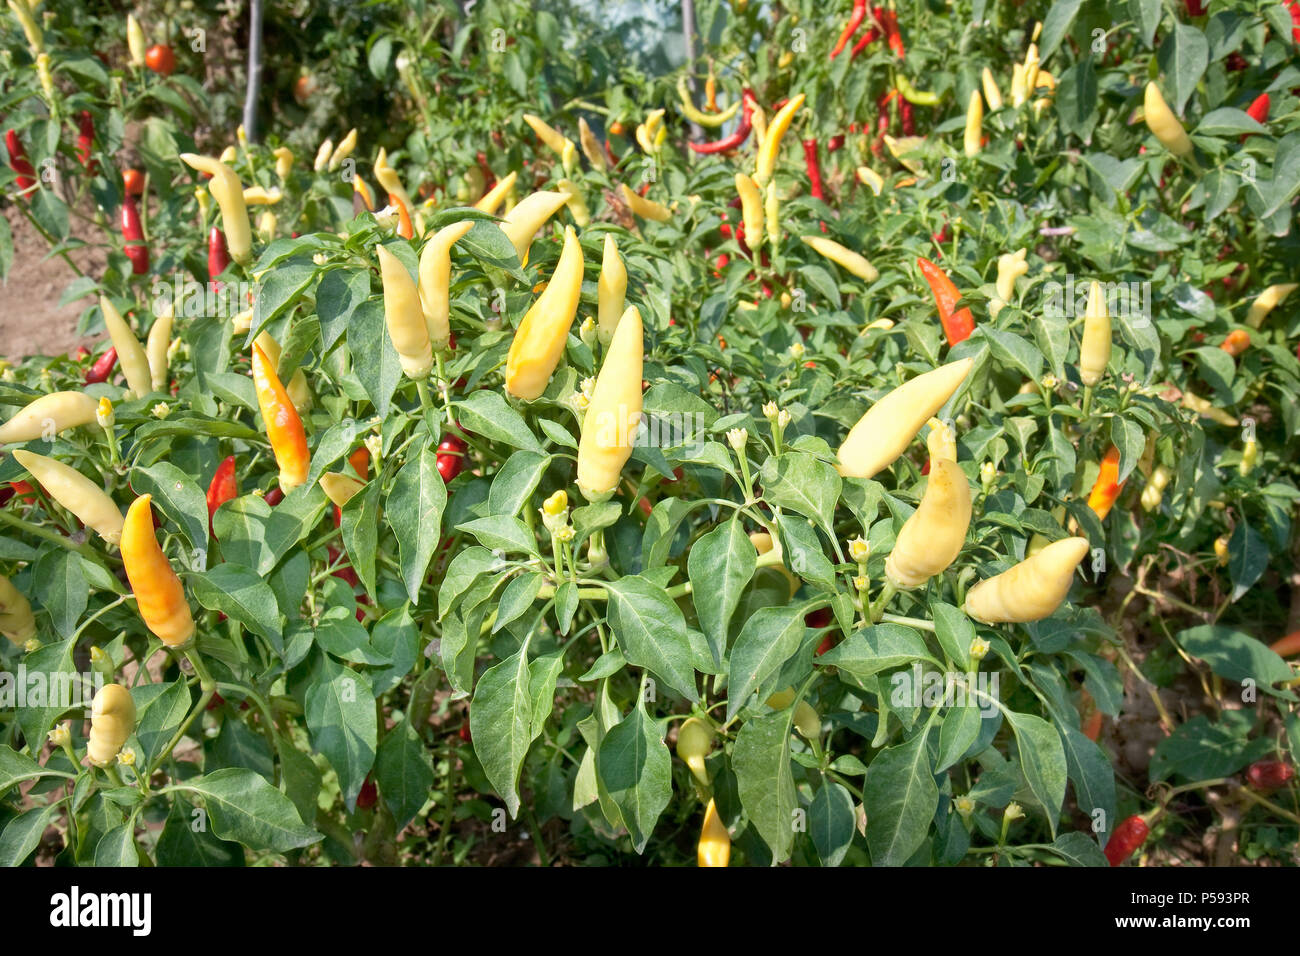 Very frash and hot red and yellow paprika in the garden Stock Photo